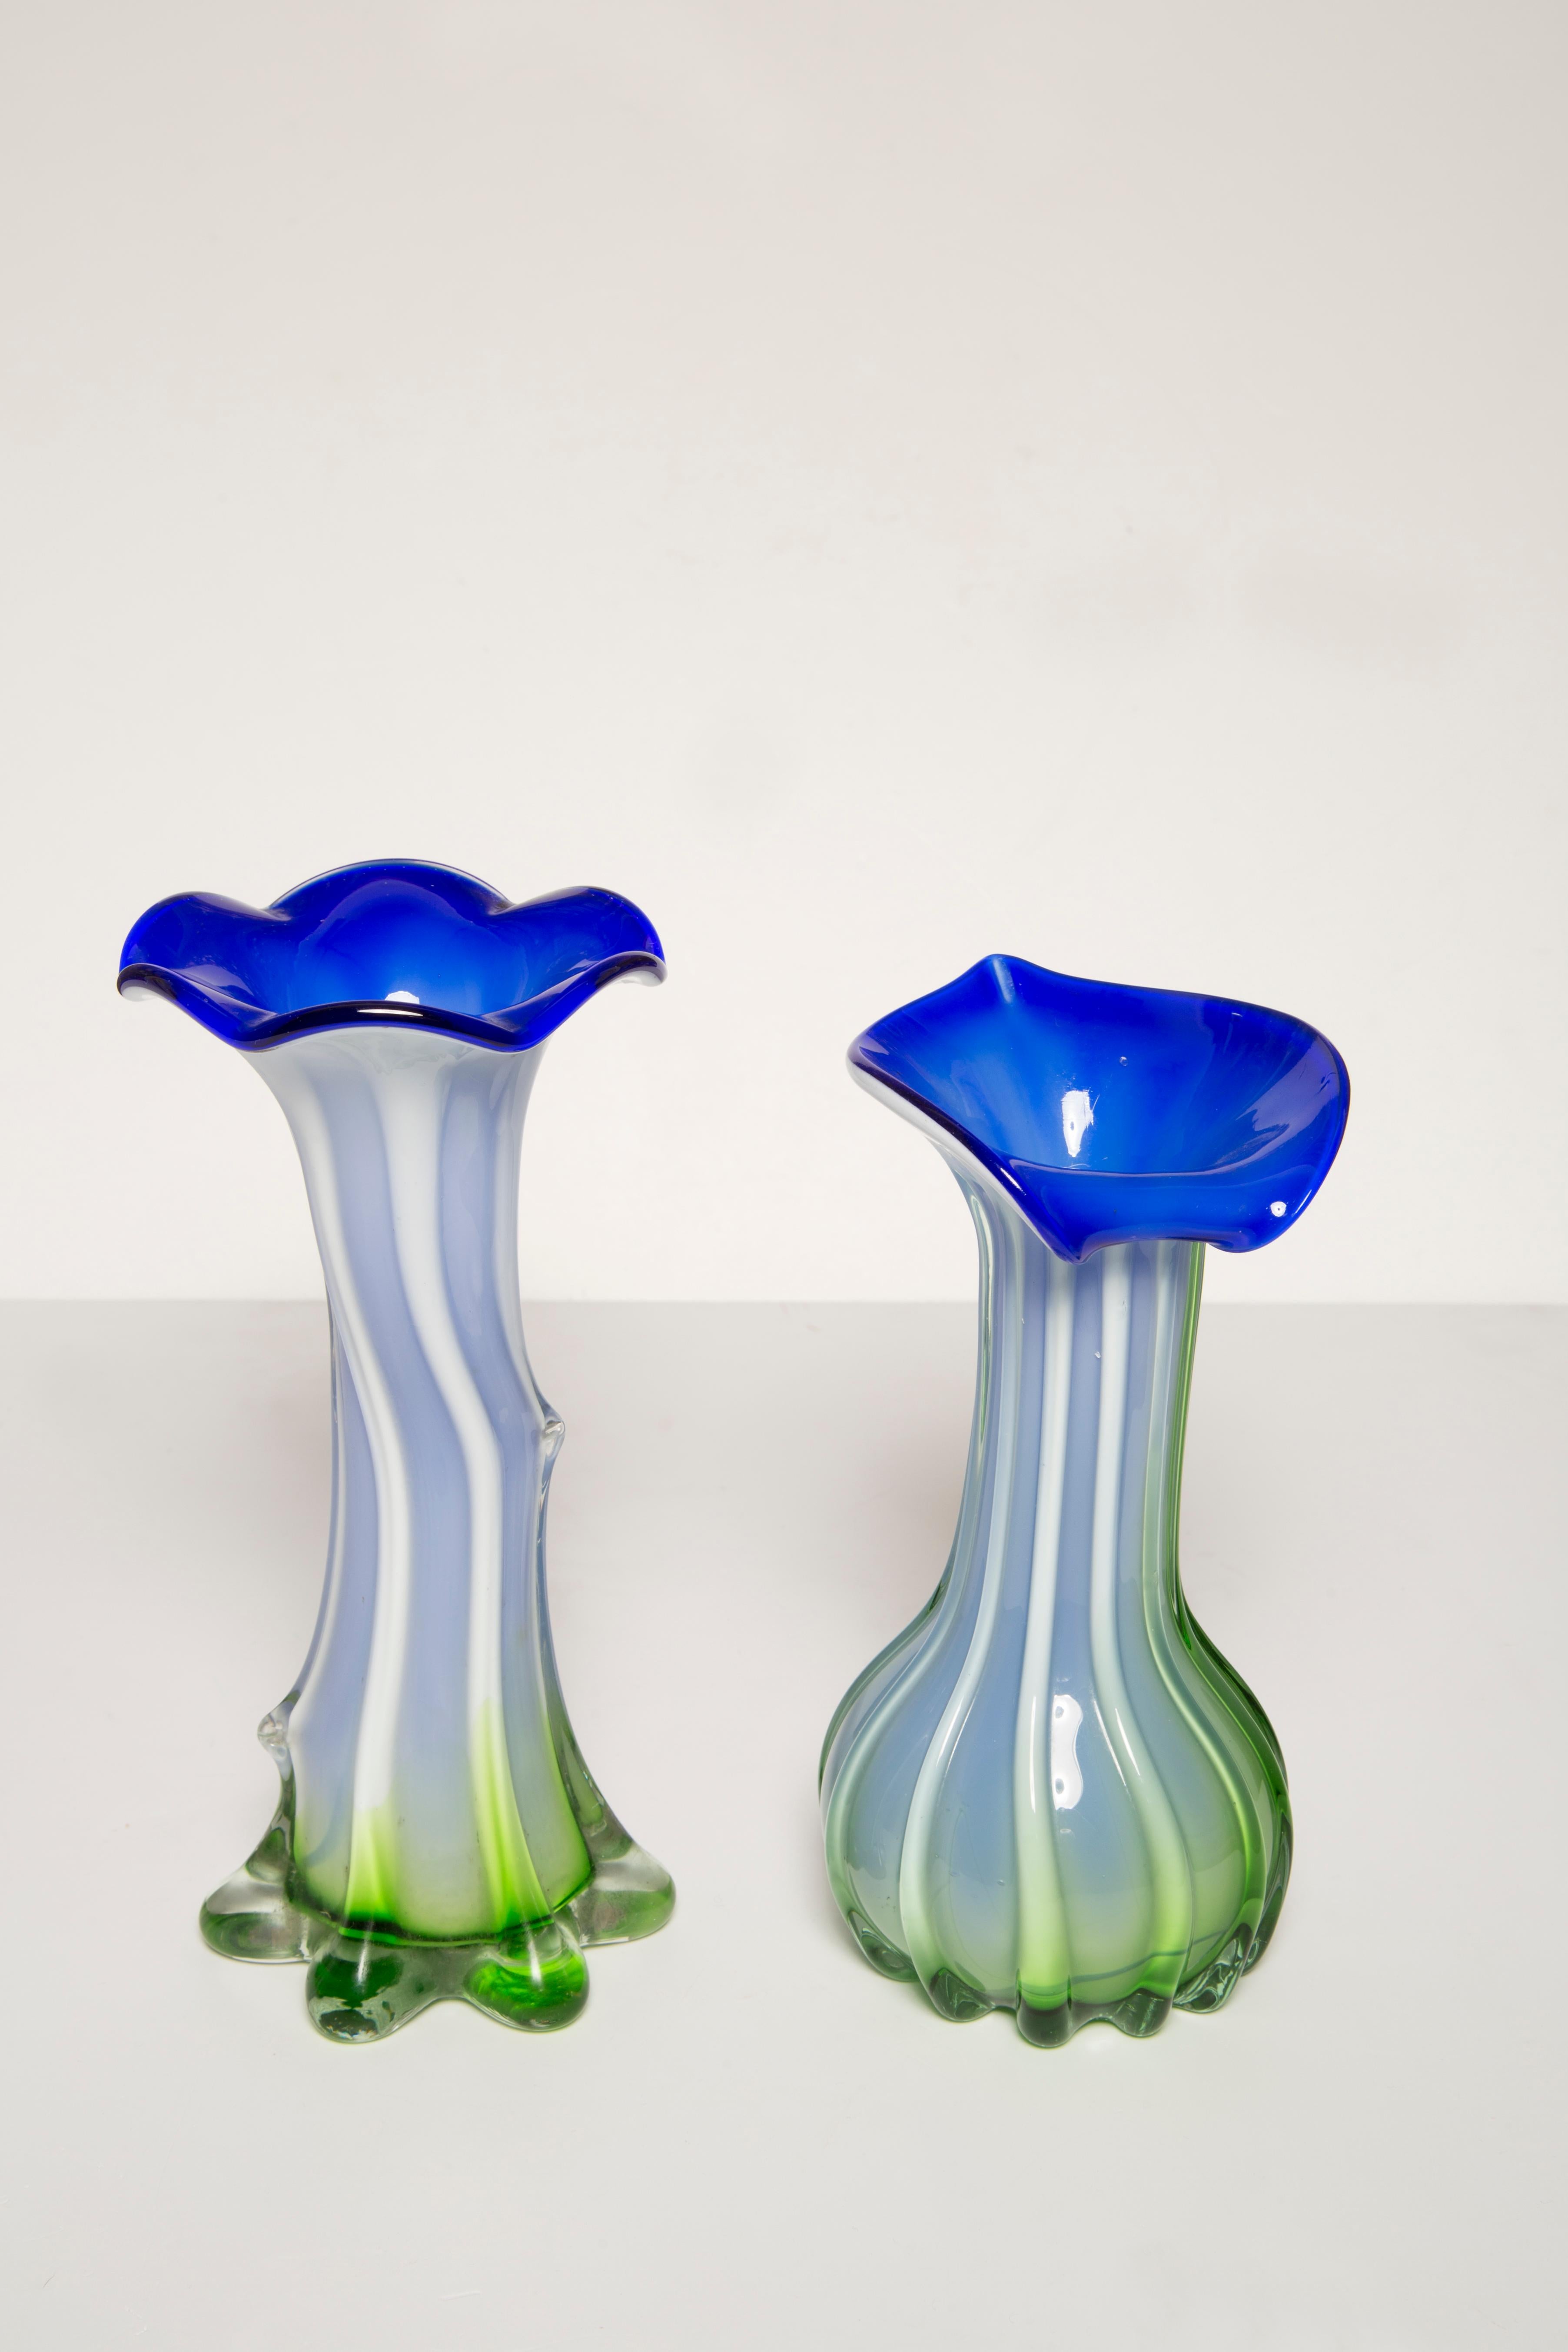 Glass Set of Two Midcentury Vintage Green and Blue Murano Vases, Italy, 1960s For Sale